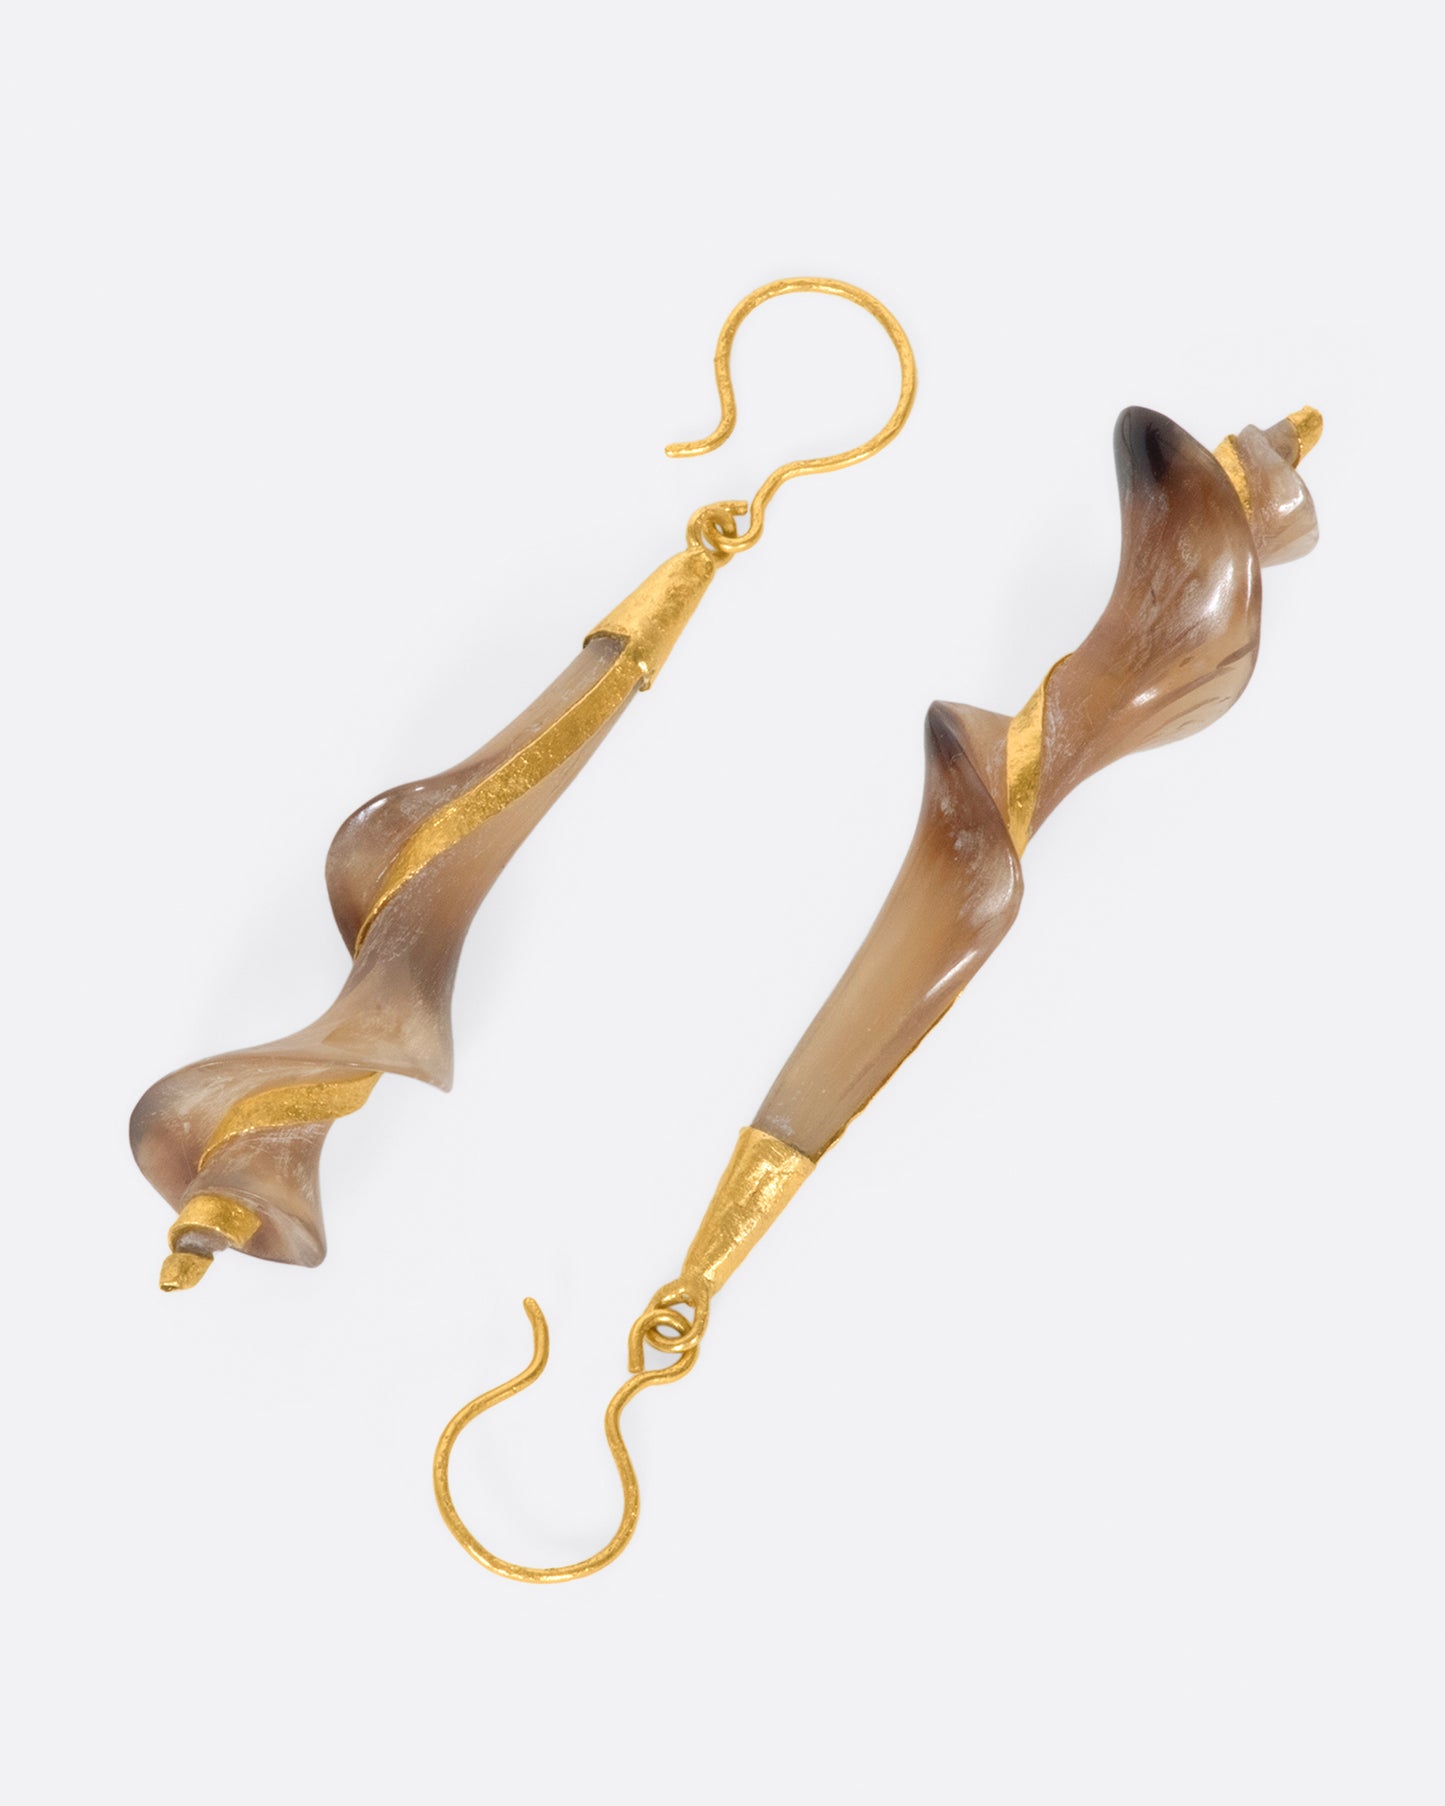 A pair of 22k yellow gold earrings with swirled brown horn drops.